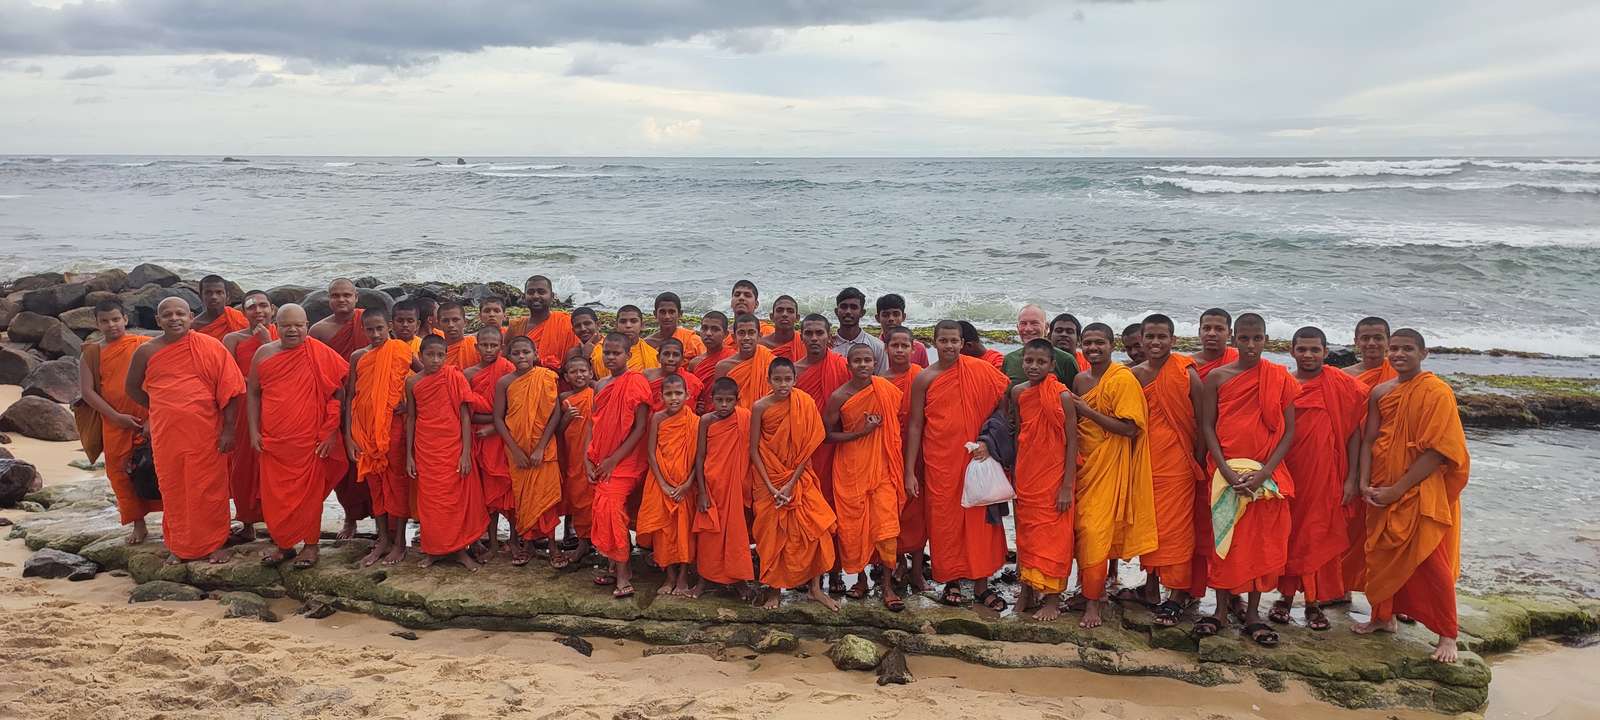 Monks on the beach online puzzle